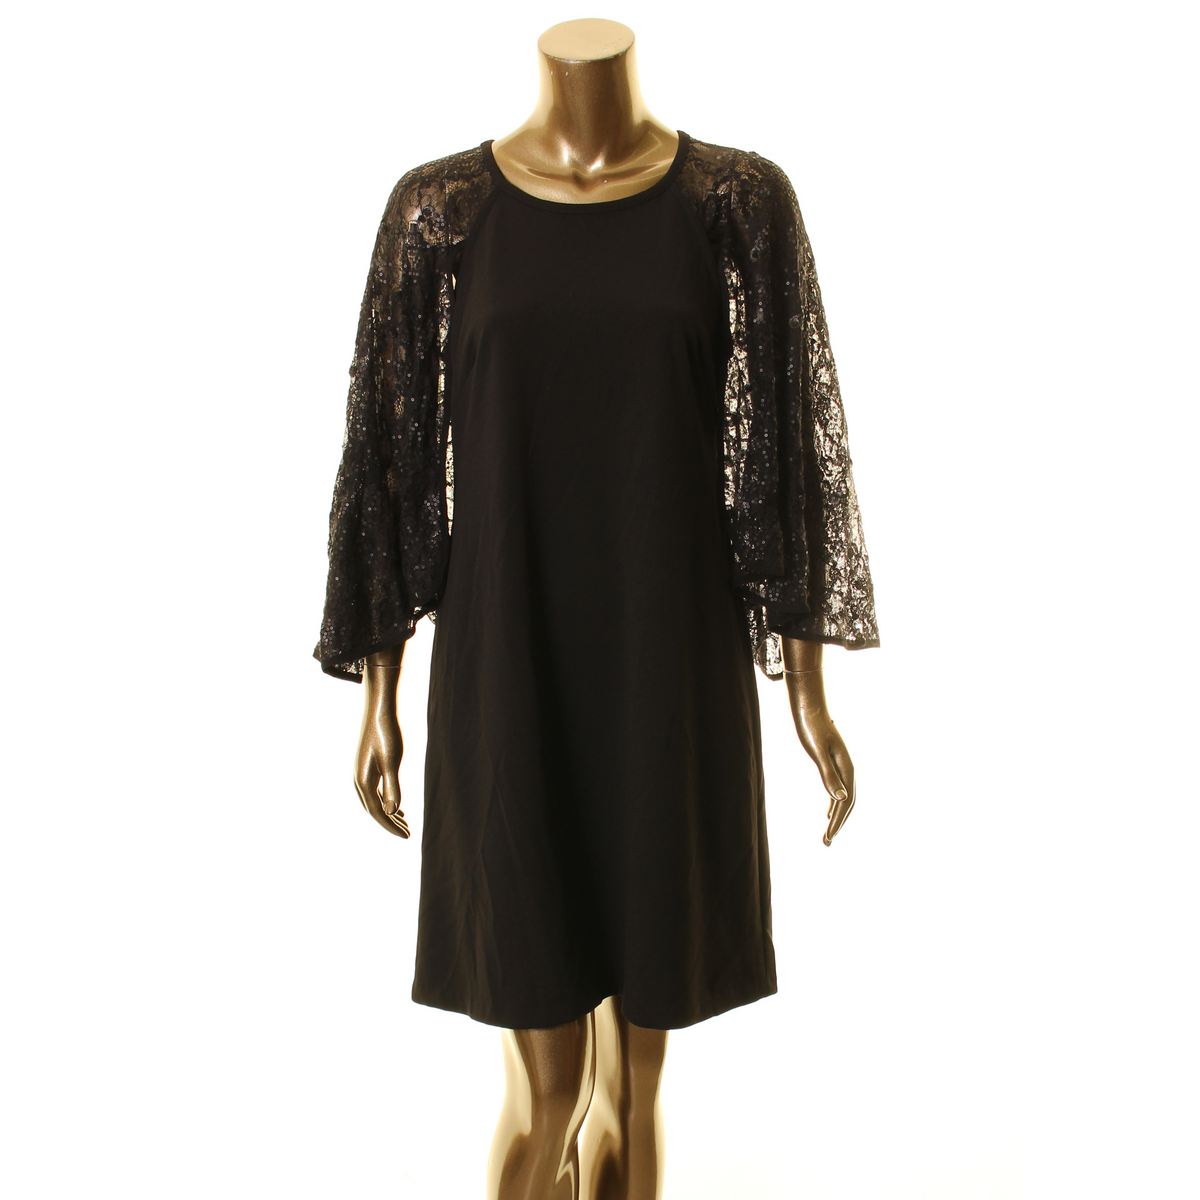 CALVIN KLEIN NEW Women's Black Sequined Cape Lace Overlay A-Line Dress ...